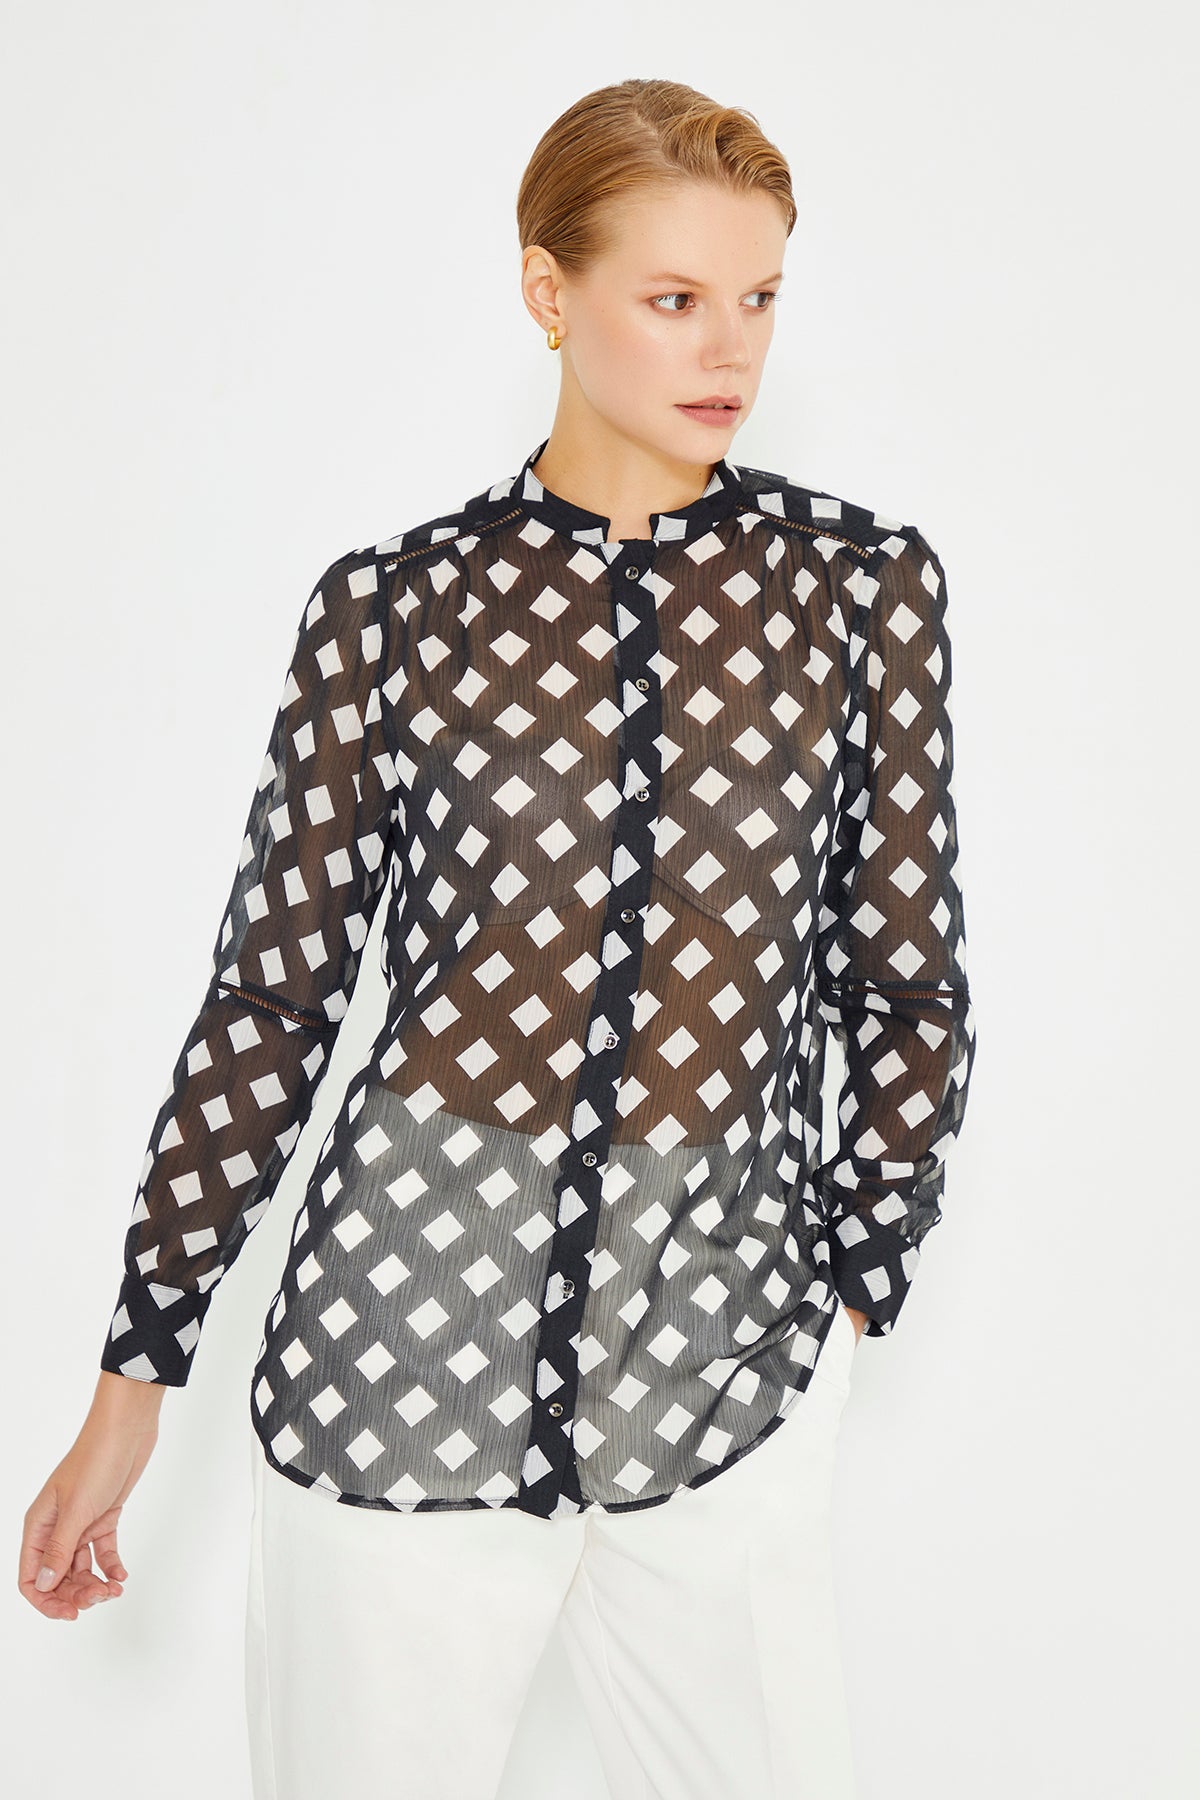 Black And White Checked Pattern Long Sleeve Ladder Strip Women's Shirt